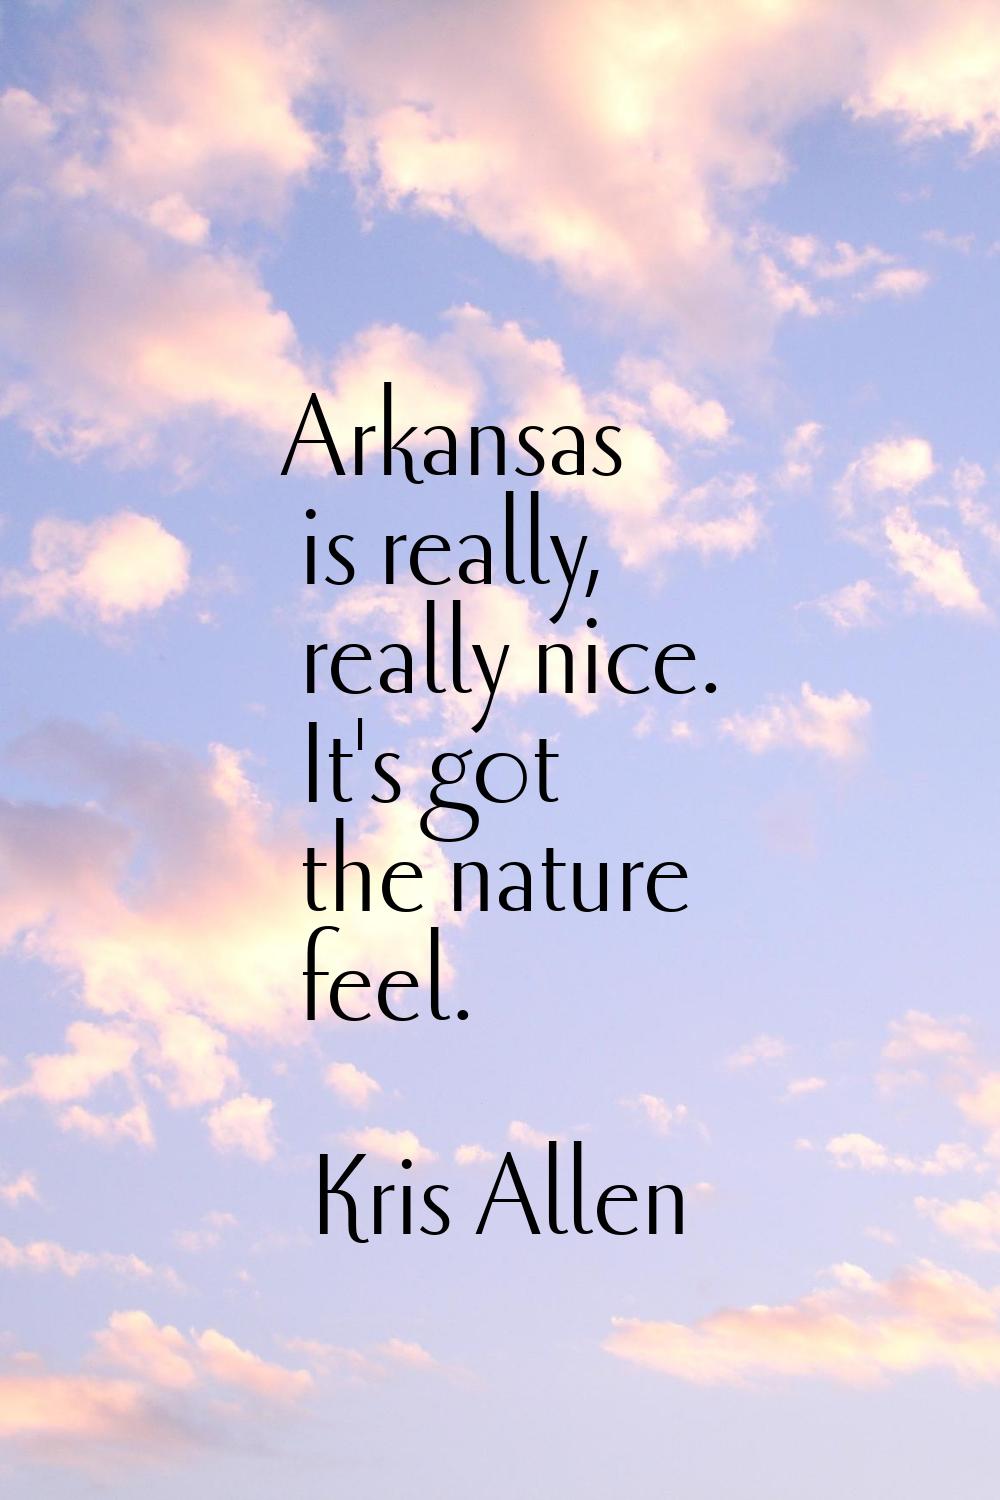 Arkansas is really, really nice. It's got the nature feel.